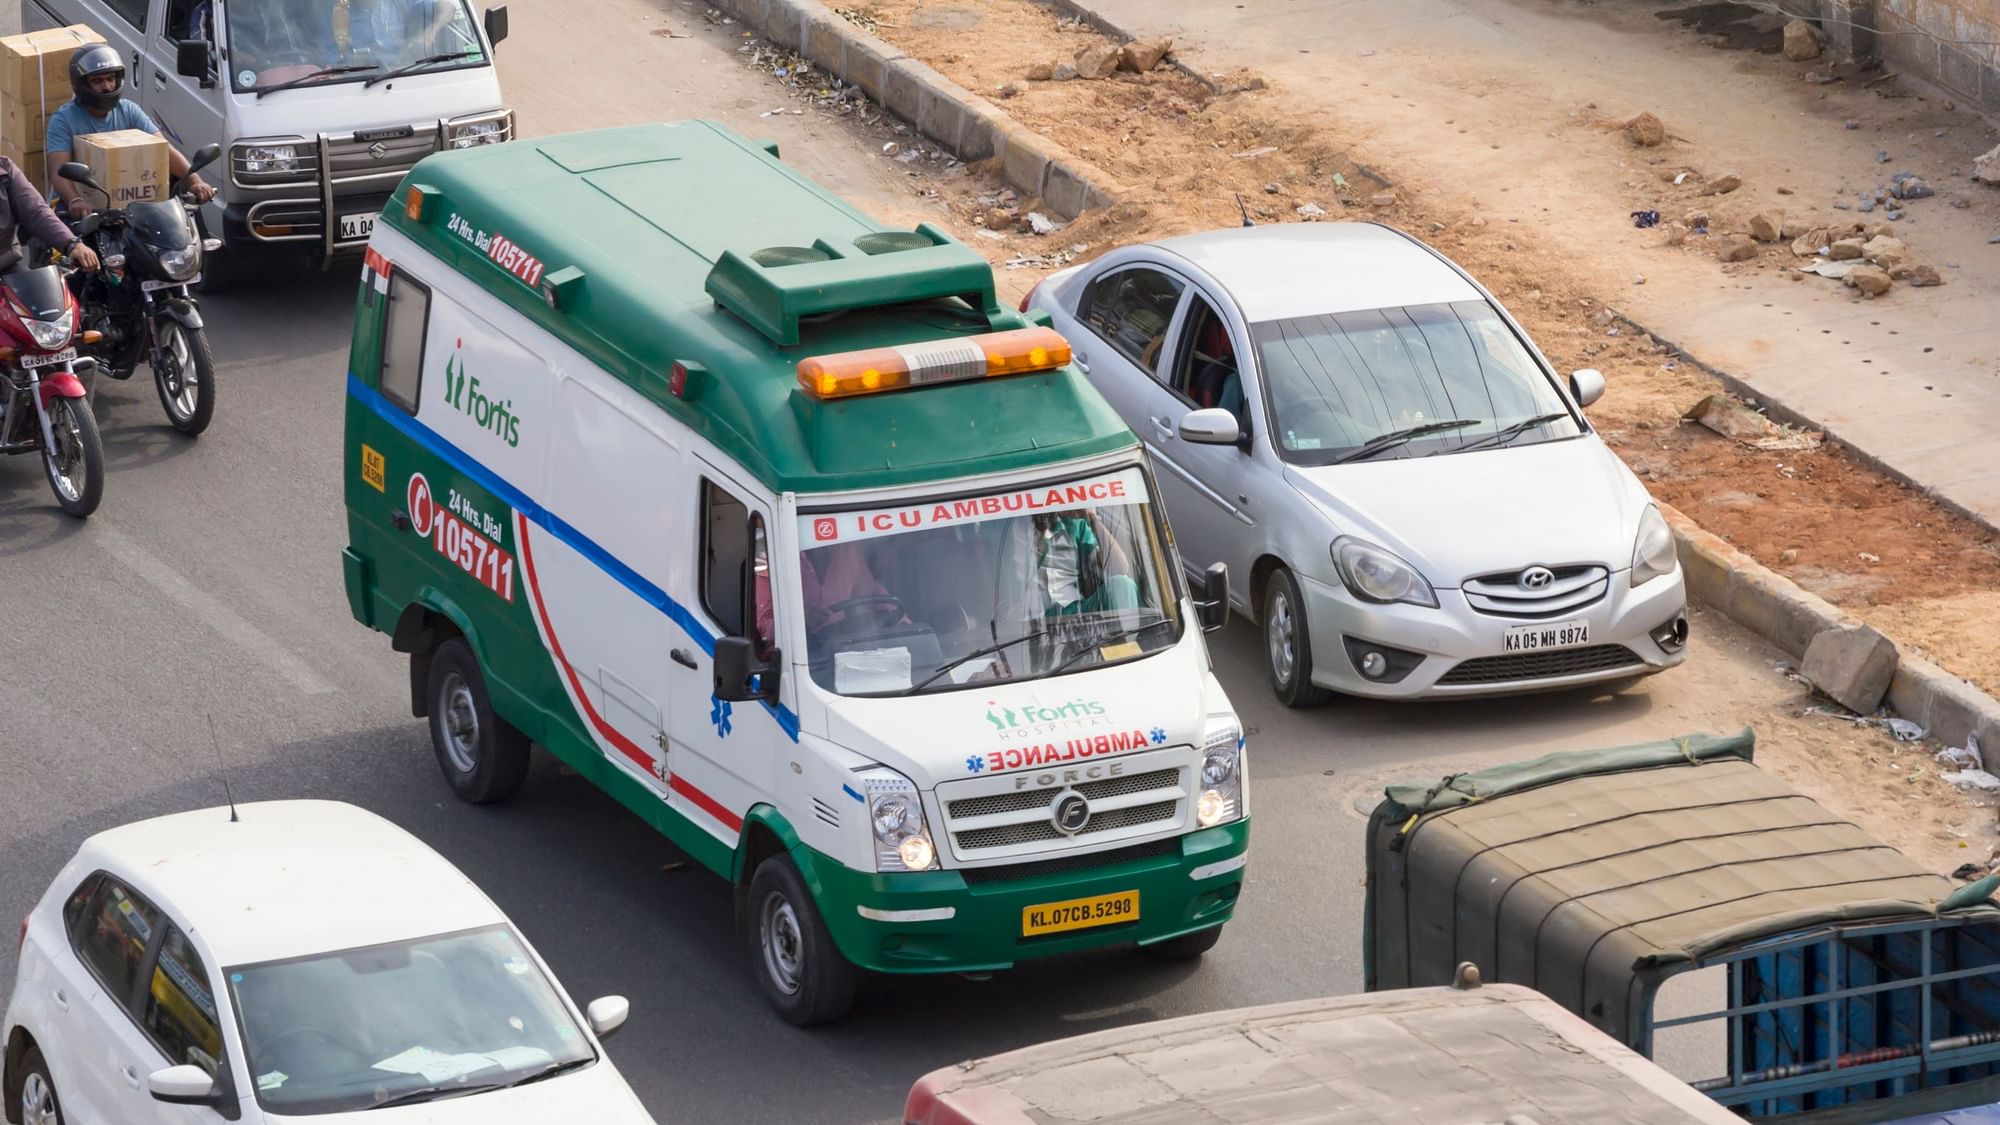 Bangalore, India: An ambulance belonging to a private hospital tries to make its way through traffic in south Bangalore, India.&nbsp;